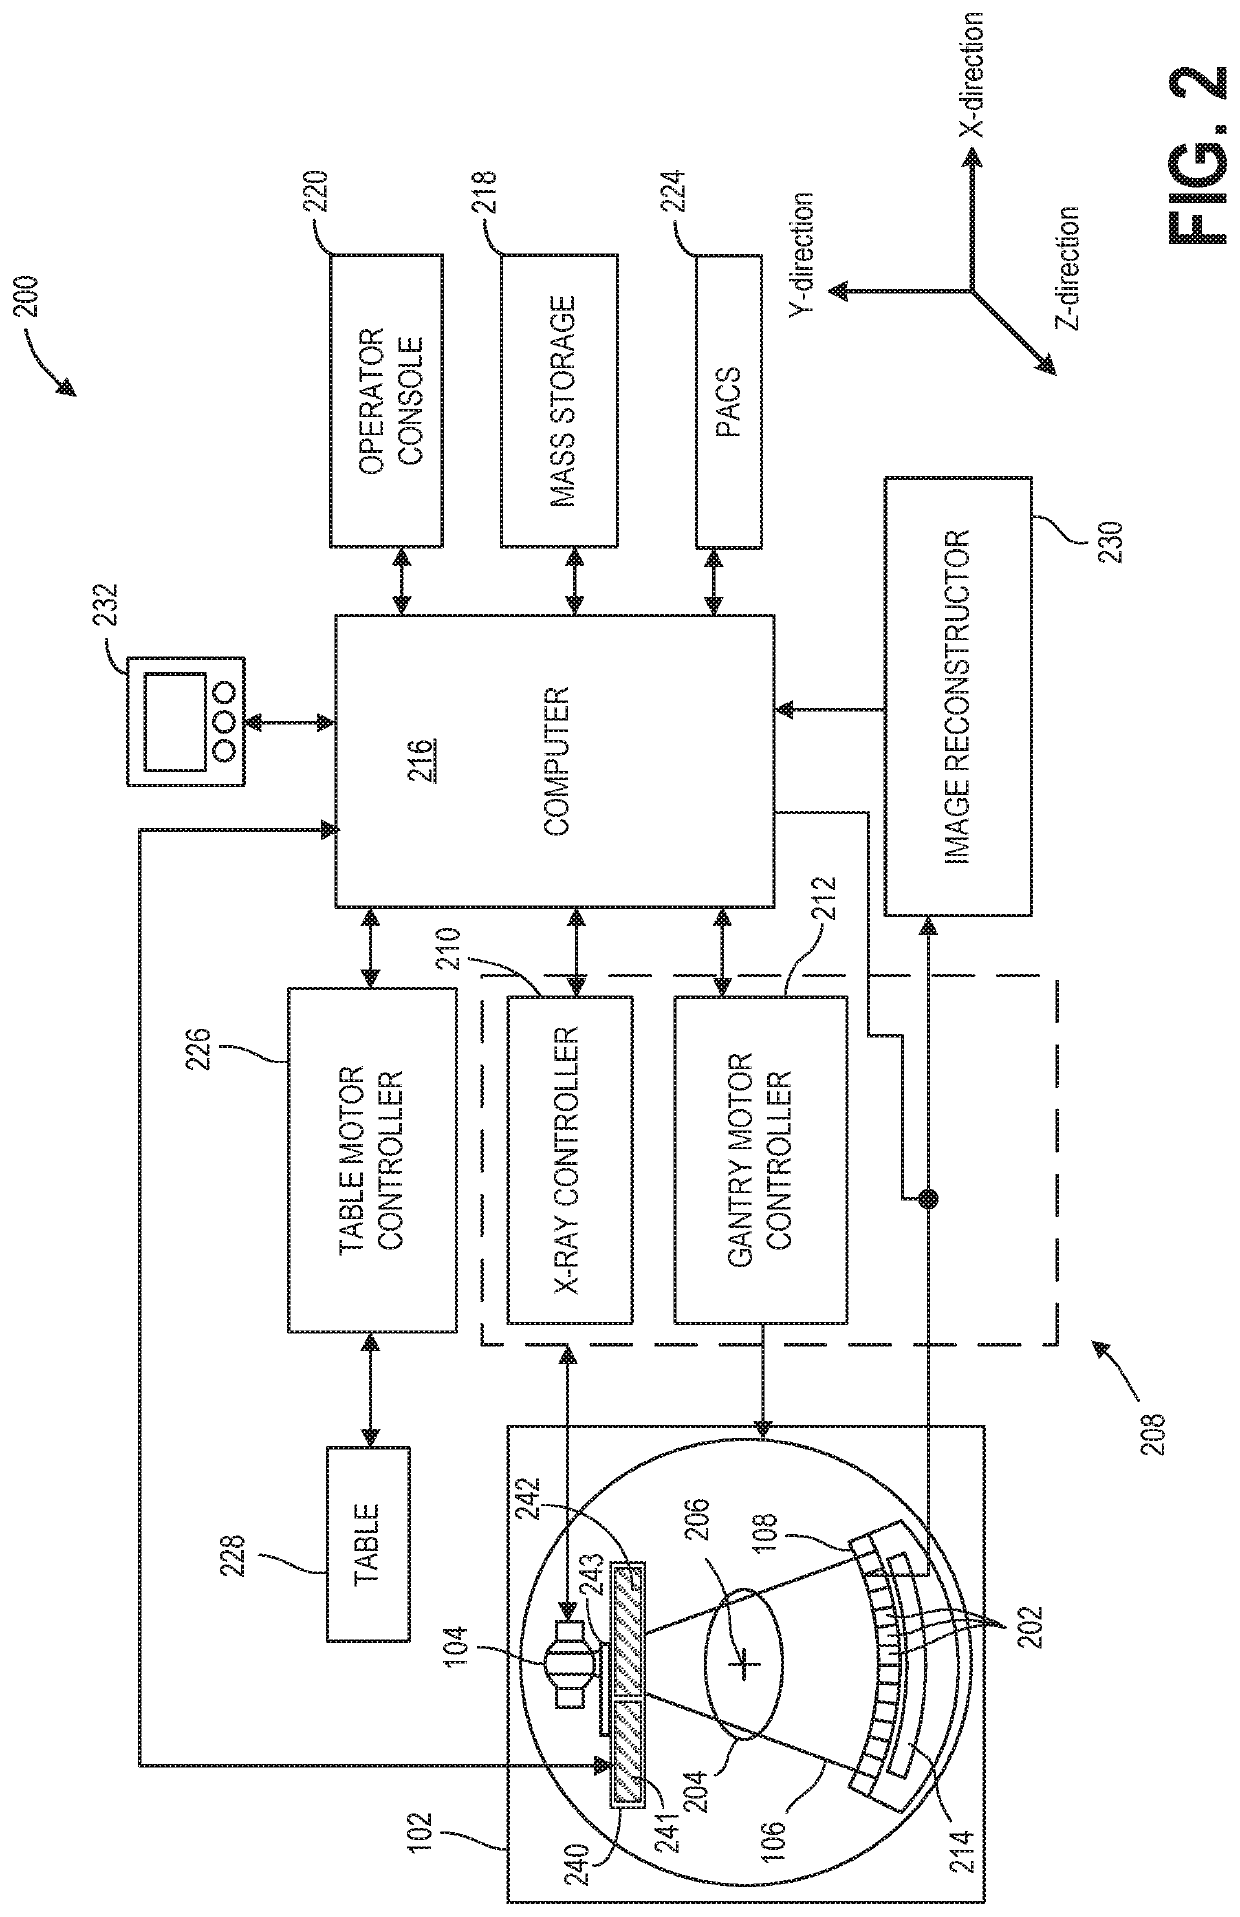 Methods and systems for x-ray tube conditioning